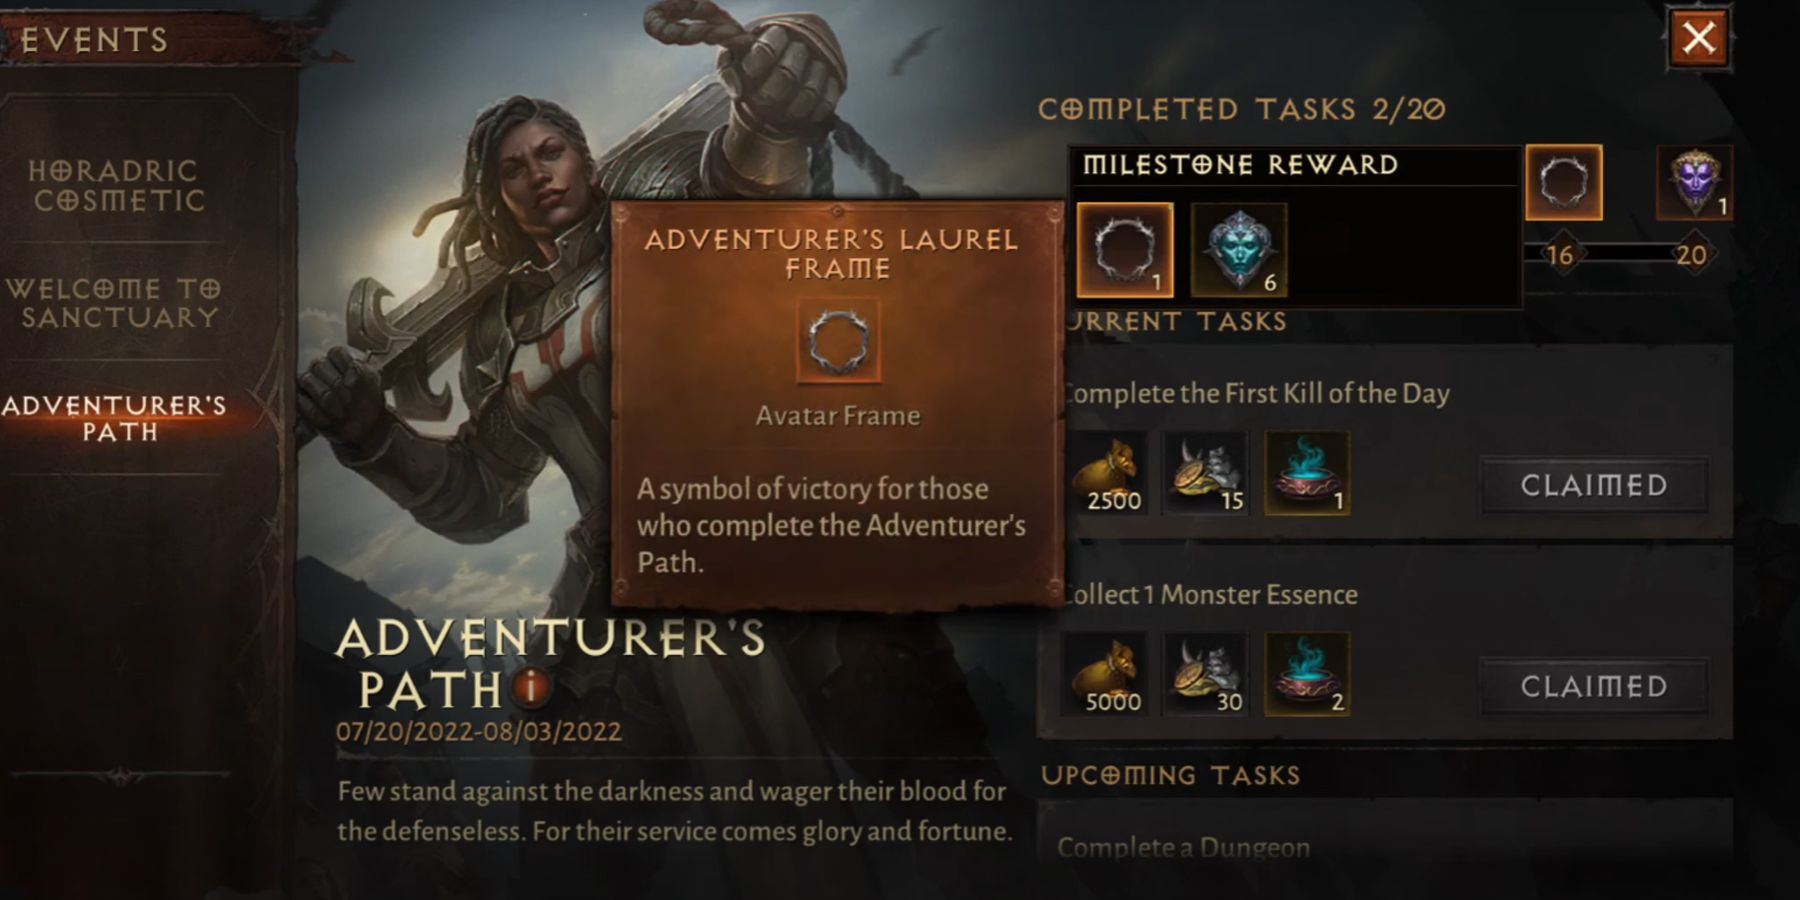 Some of the rewards upon completion of the Adventurers Path